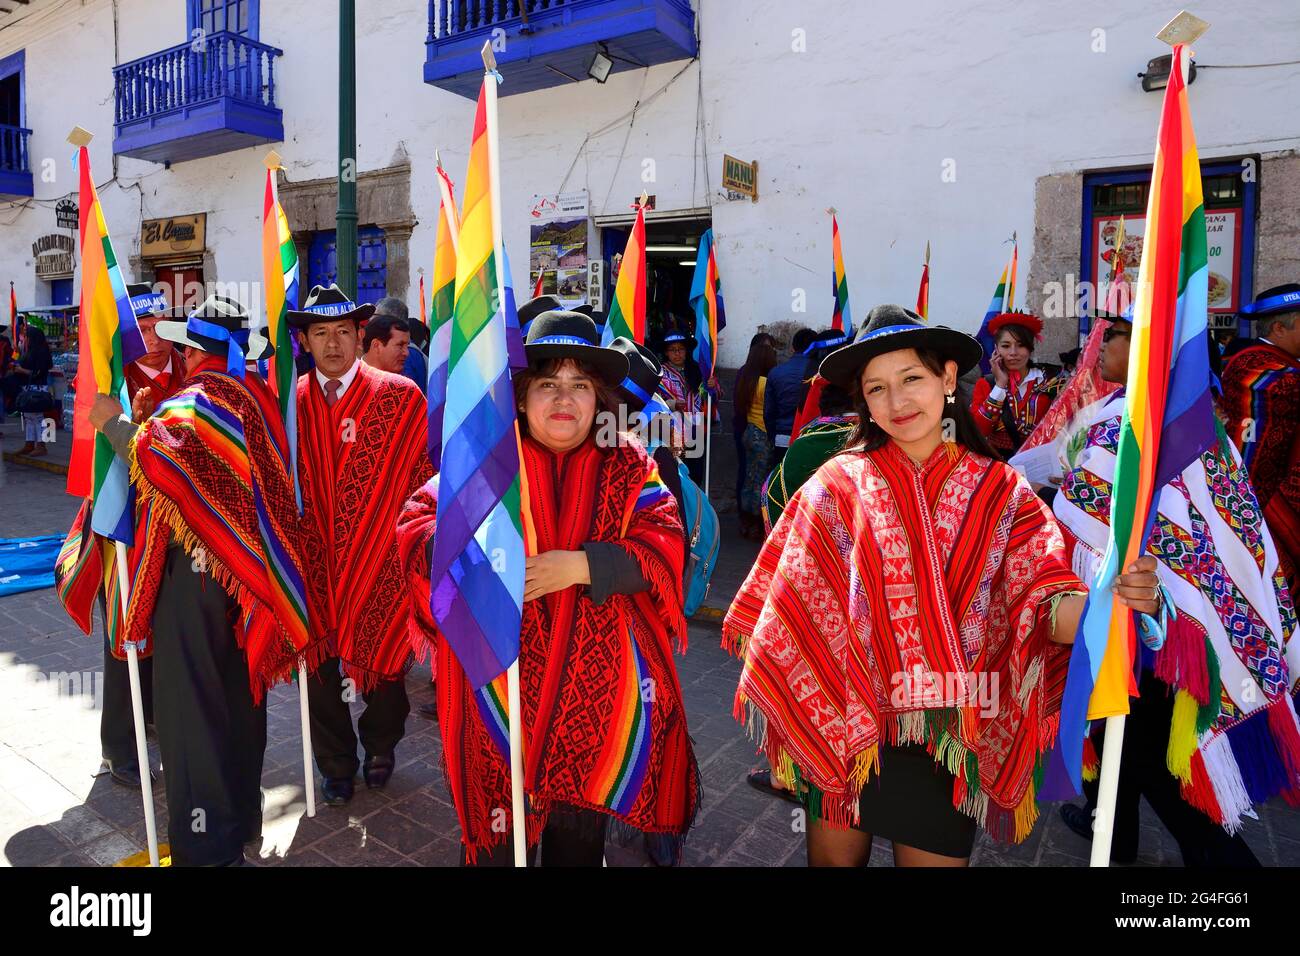 Group with flags in ponchos in the old town, Cusco, Peru Stock Photo